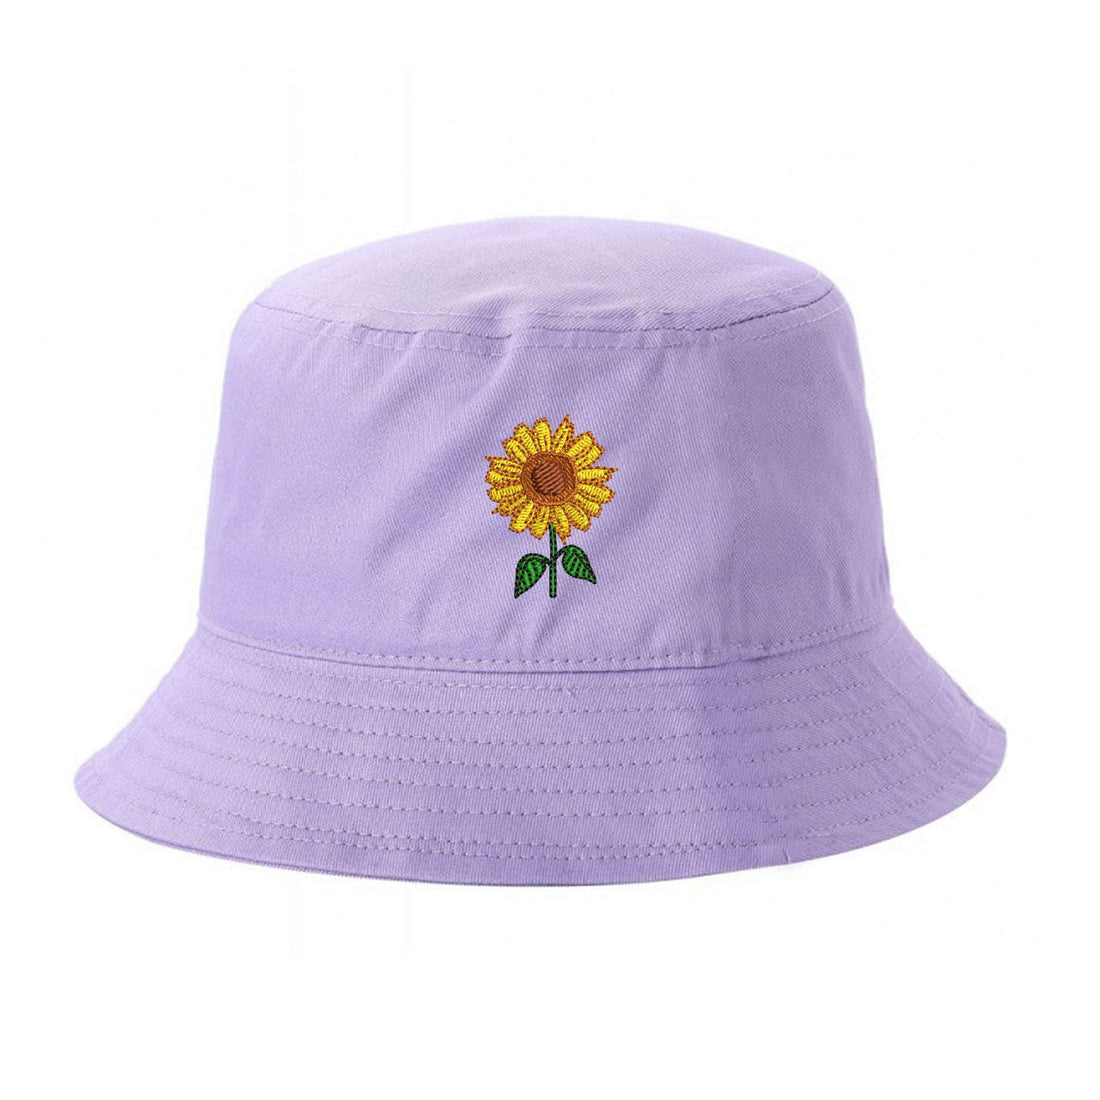 Lilac Bucket hat embroidered with a sunflower for spring - DSY Lifestyle